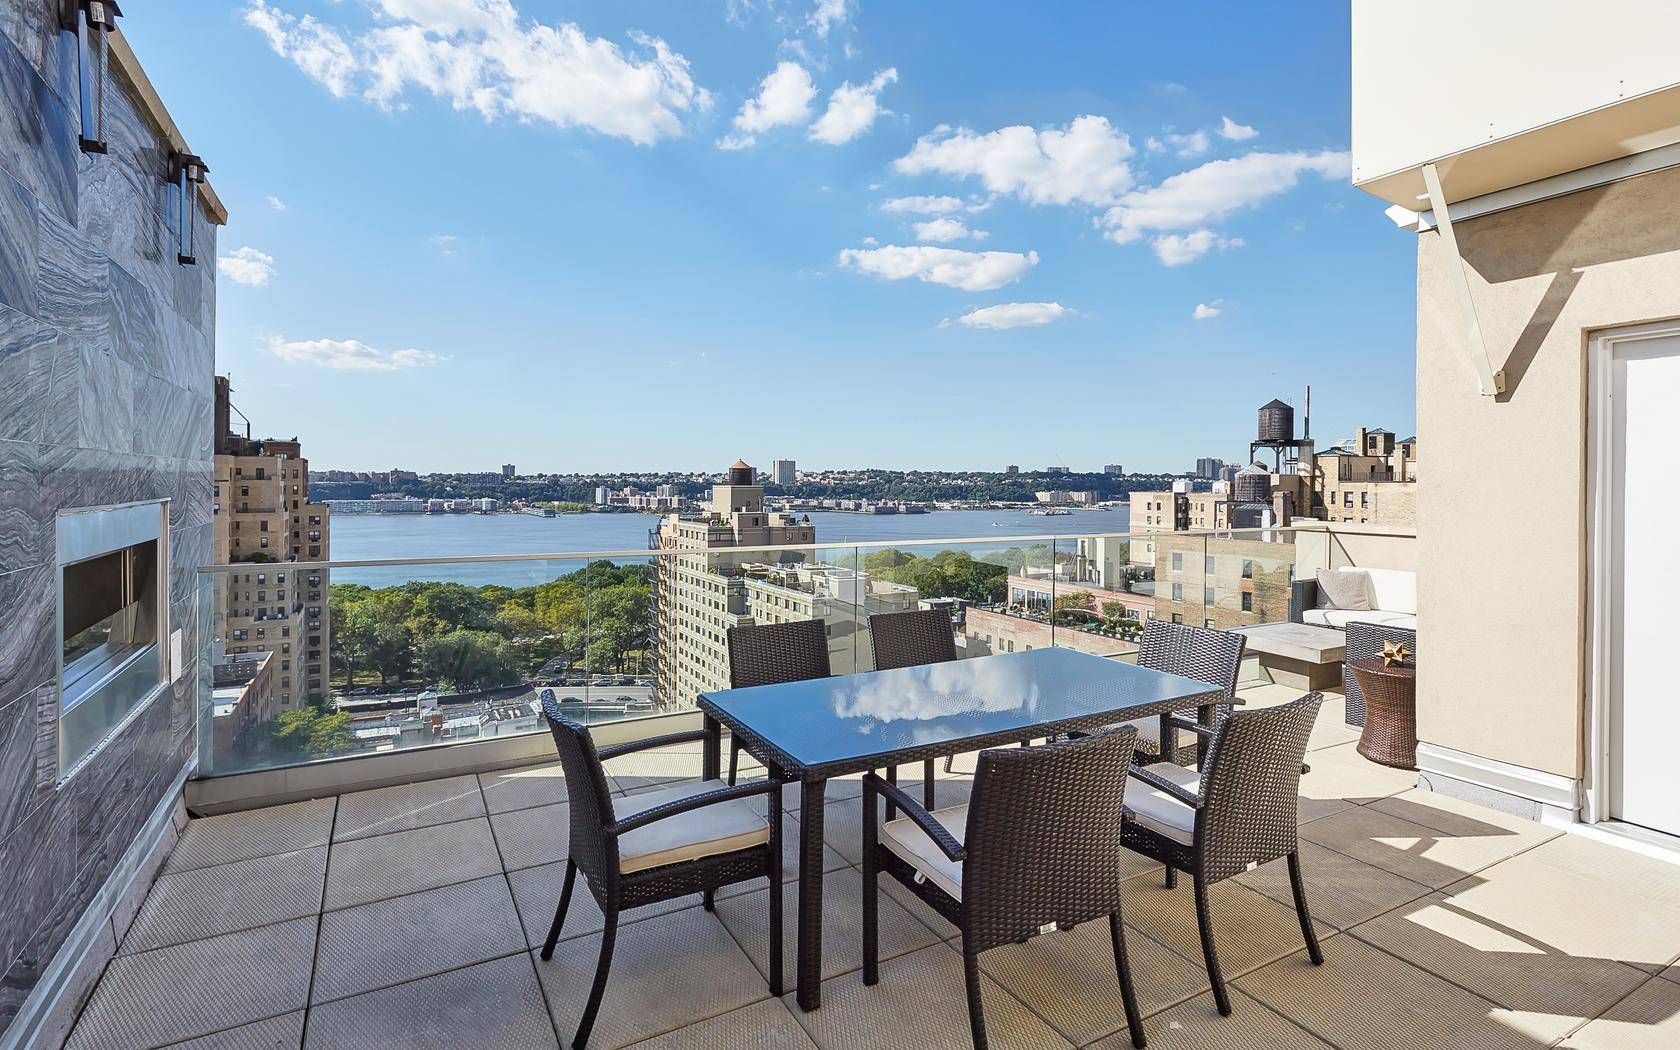 Brand New 4 Bedroom 4 .5 Bathroom Triplex Penthouse On The Upper West Side  Providing Stunning Riverviews - Private Rooftop Terrace!